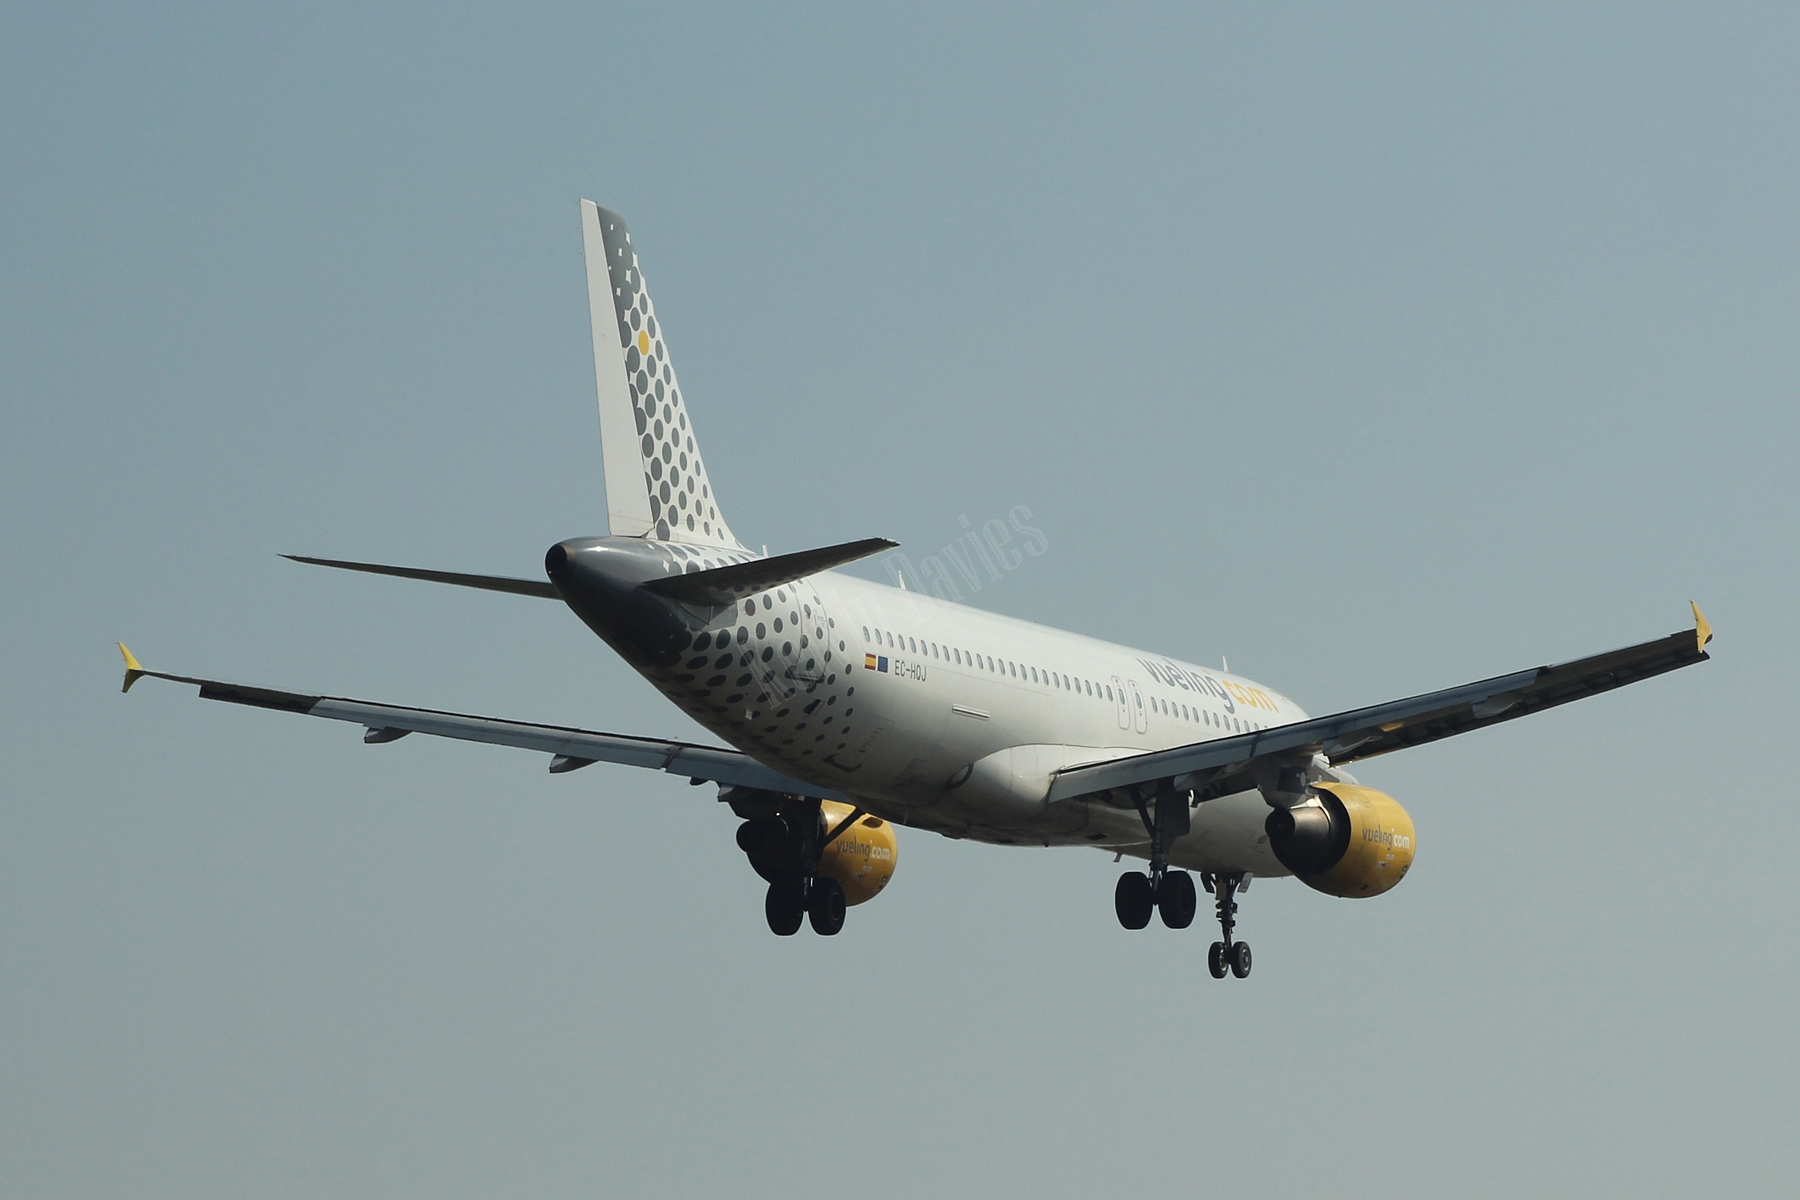 Vueling Airlines A320 EC-HQJ